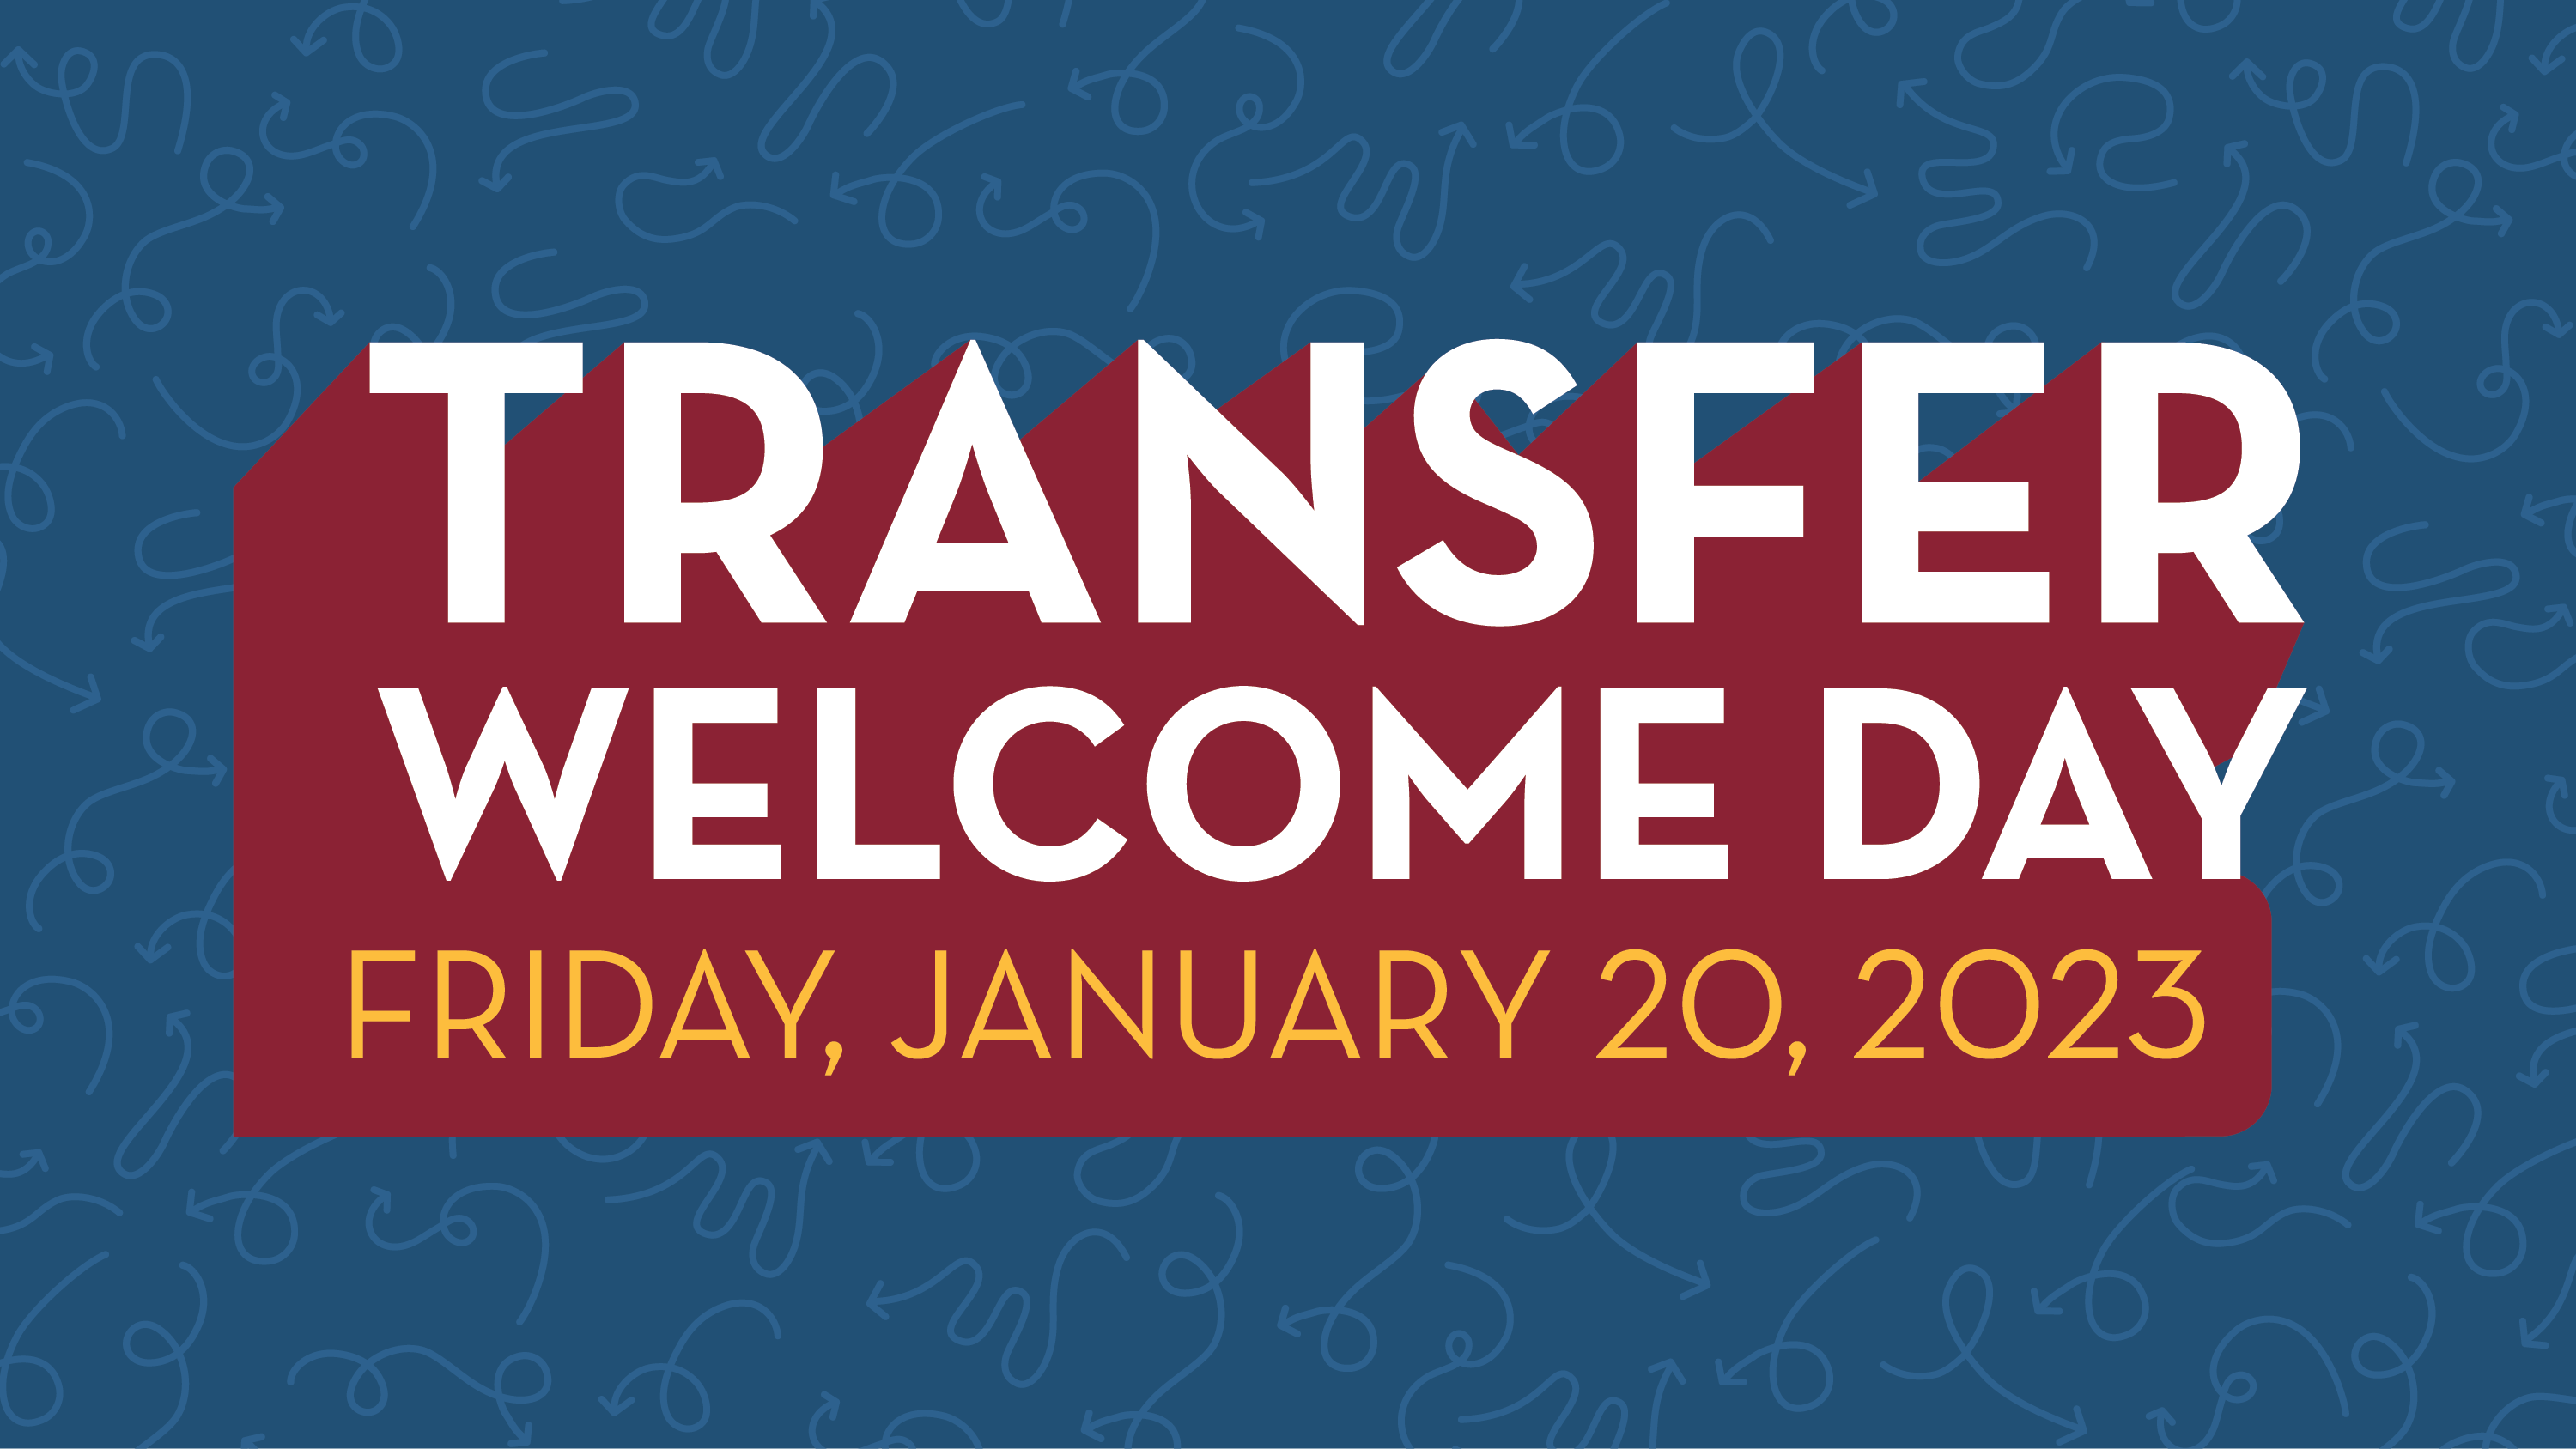 Transfer Welcome Day - Friday, Jan 20, 2023